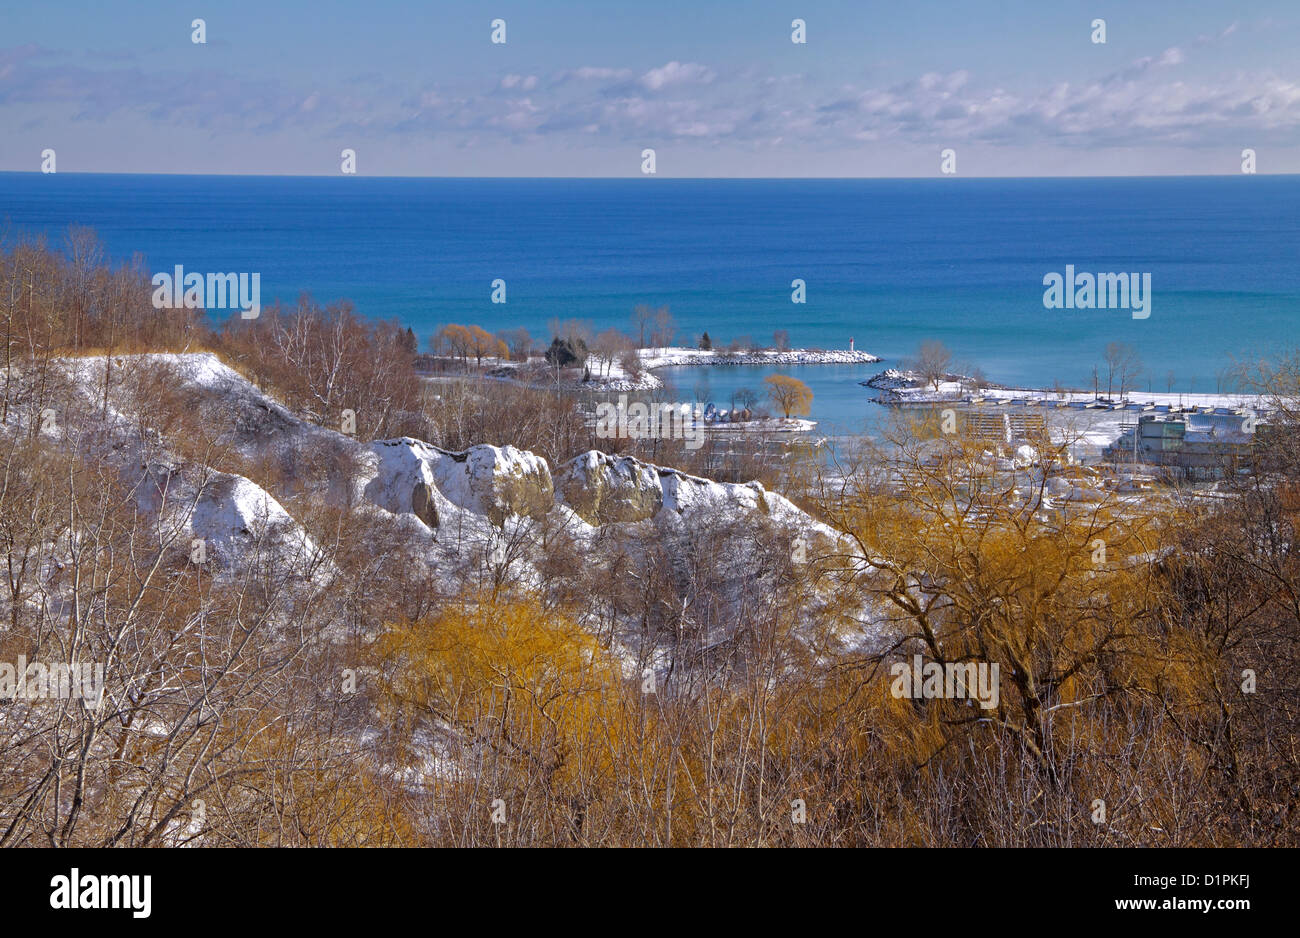 Scarborough Bluffs with marinas of Bluffers Park Yacht Club and Scarborough Sailing Club in the background Stock Photo